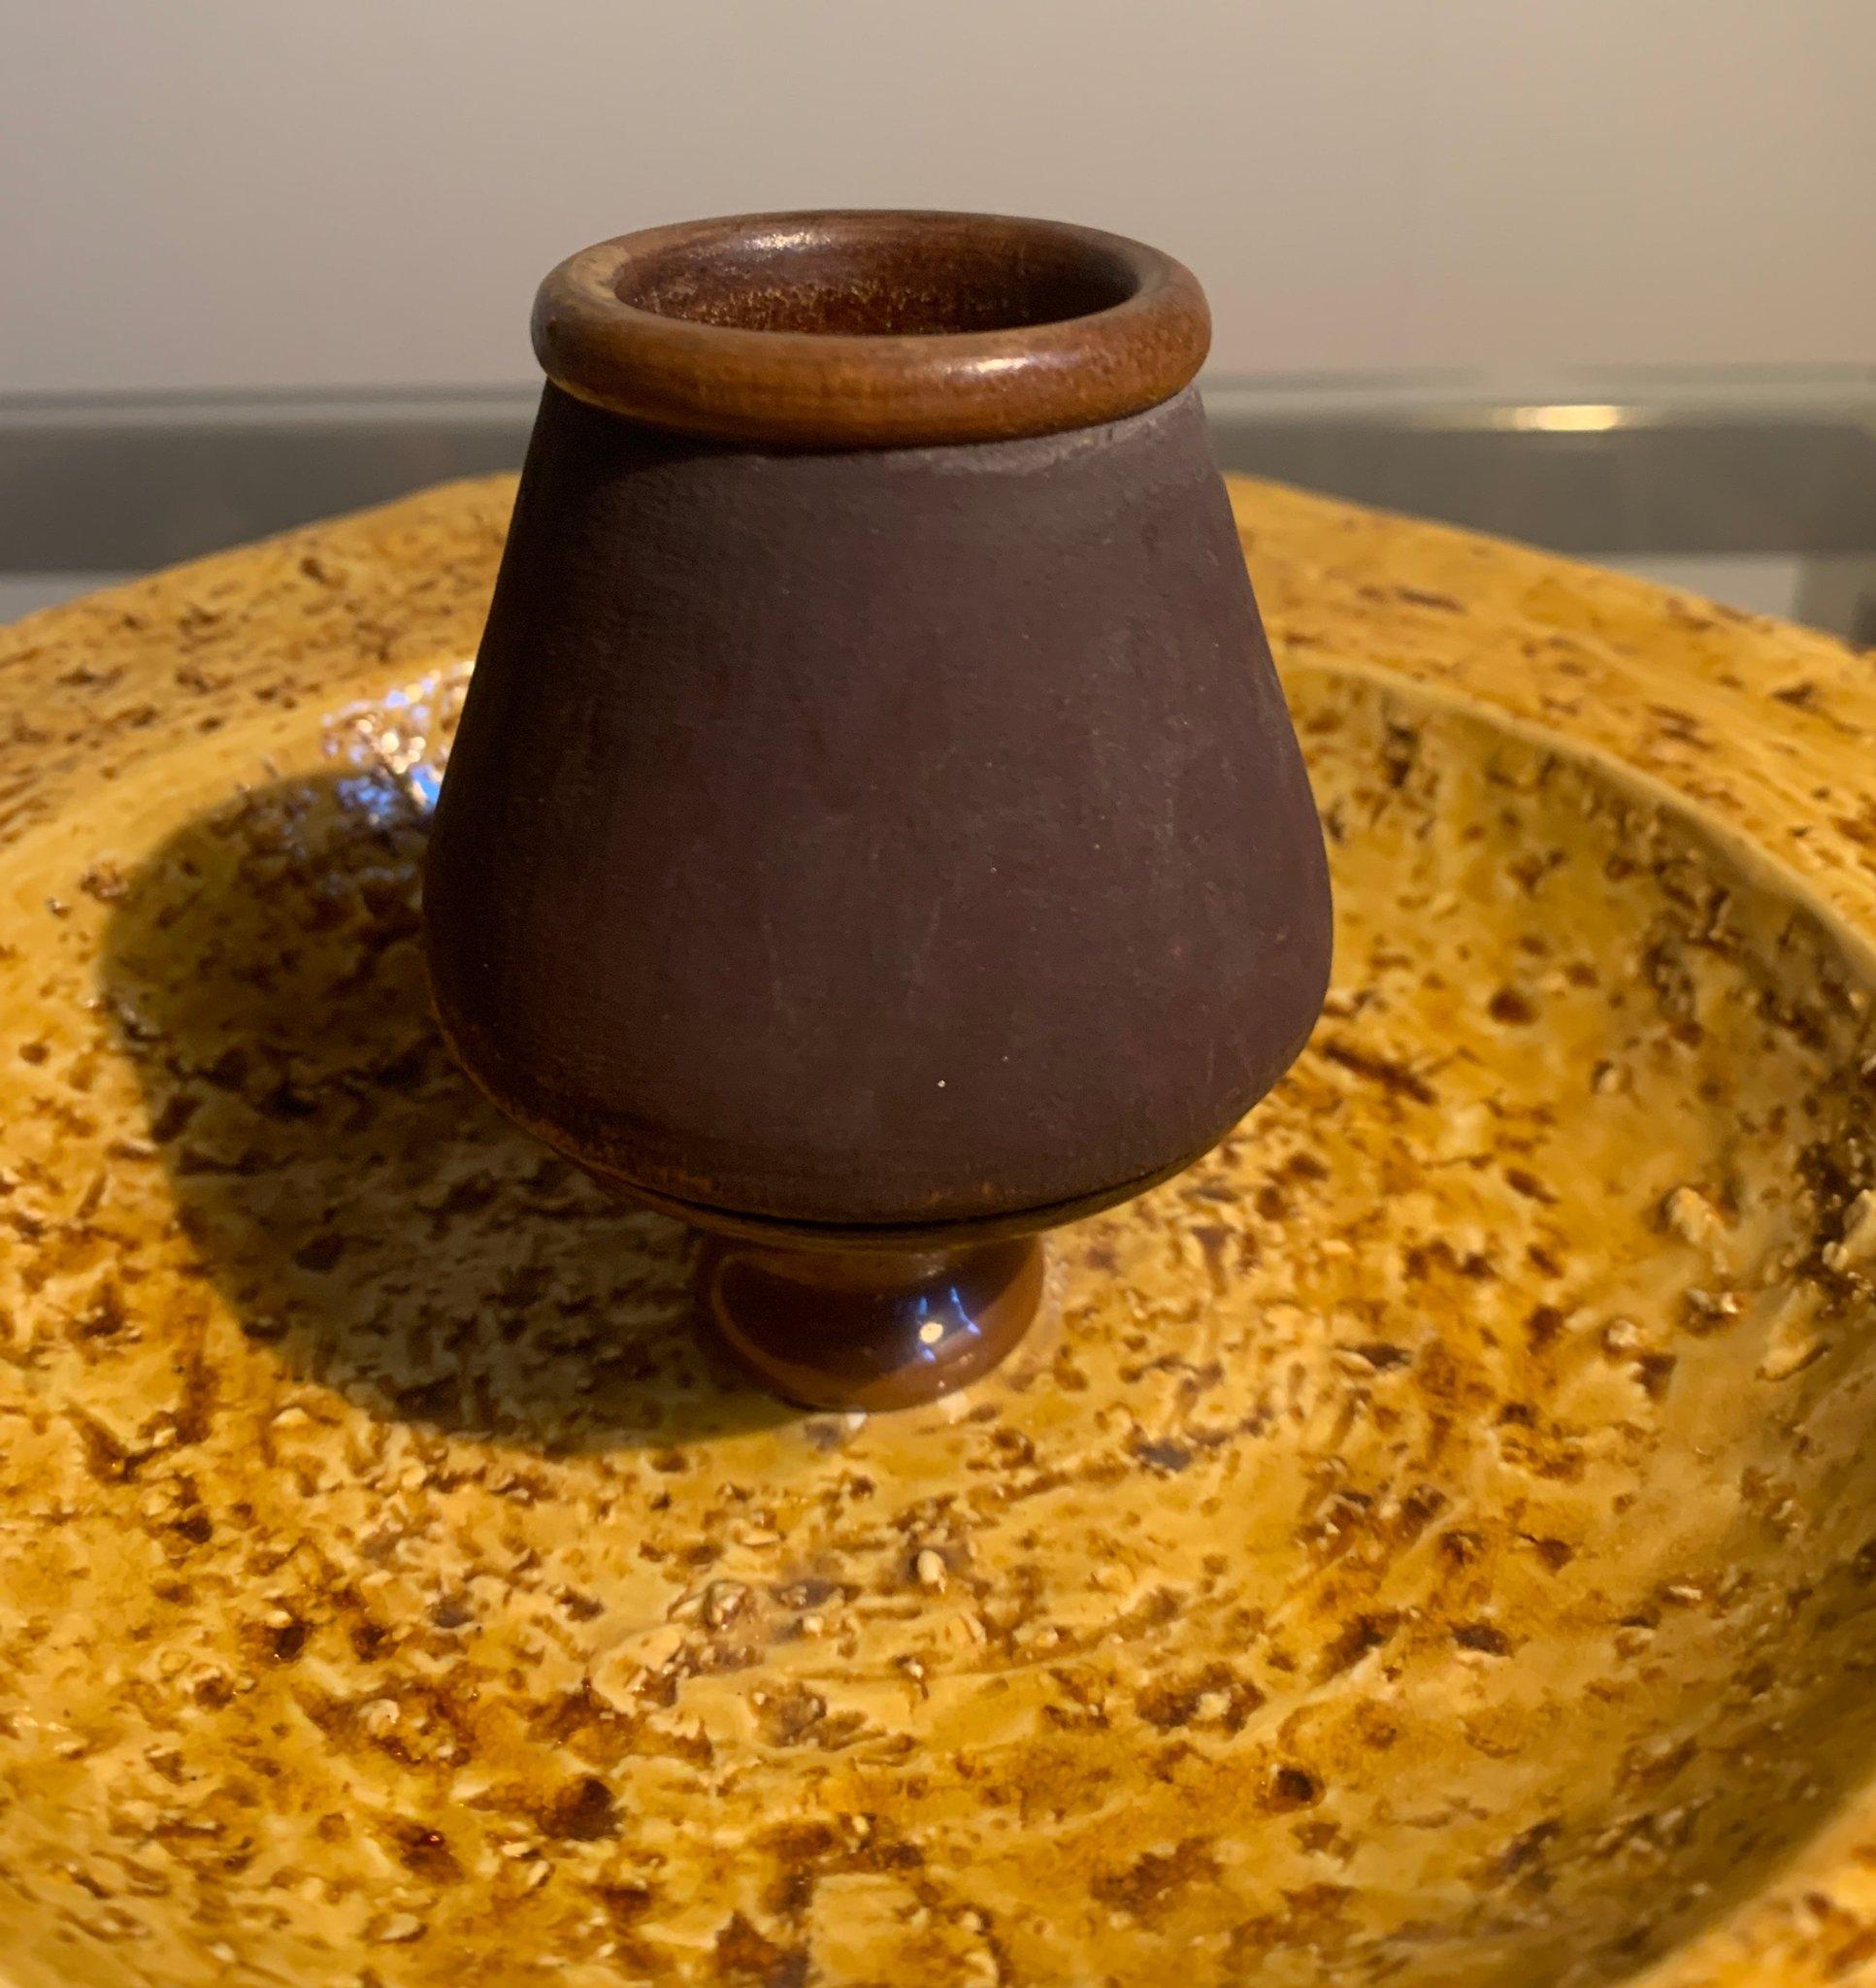 Atypical dish in chamotte, by Gunnar Nylund, Rörstrand.
Ocher in color with beautiful proportions.
Small central vase that can be used as a candle holder, incense burner, presentation dish.
It can have several functions according to your